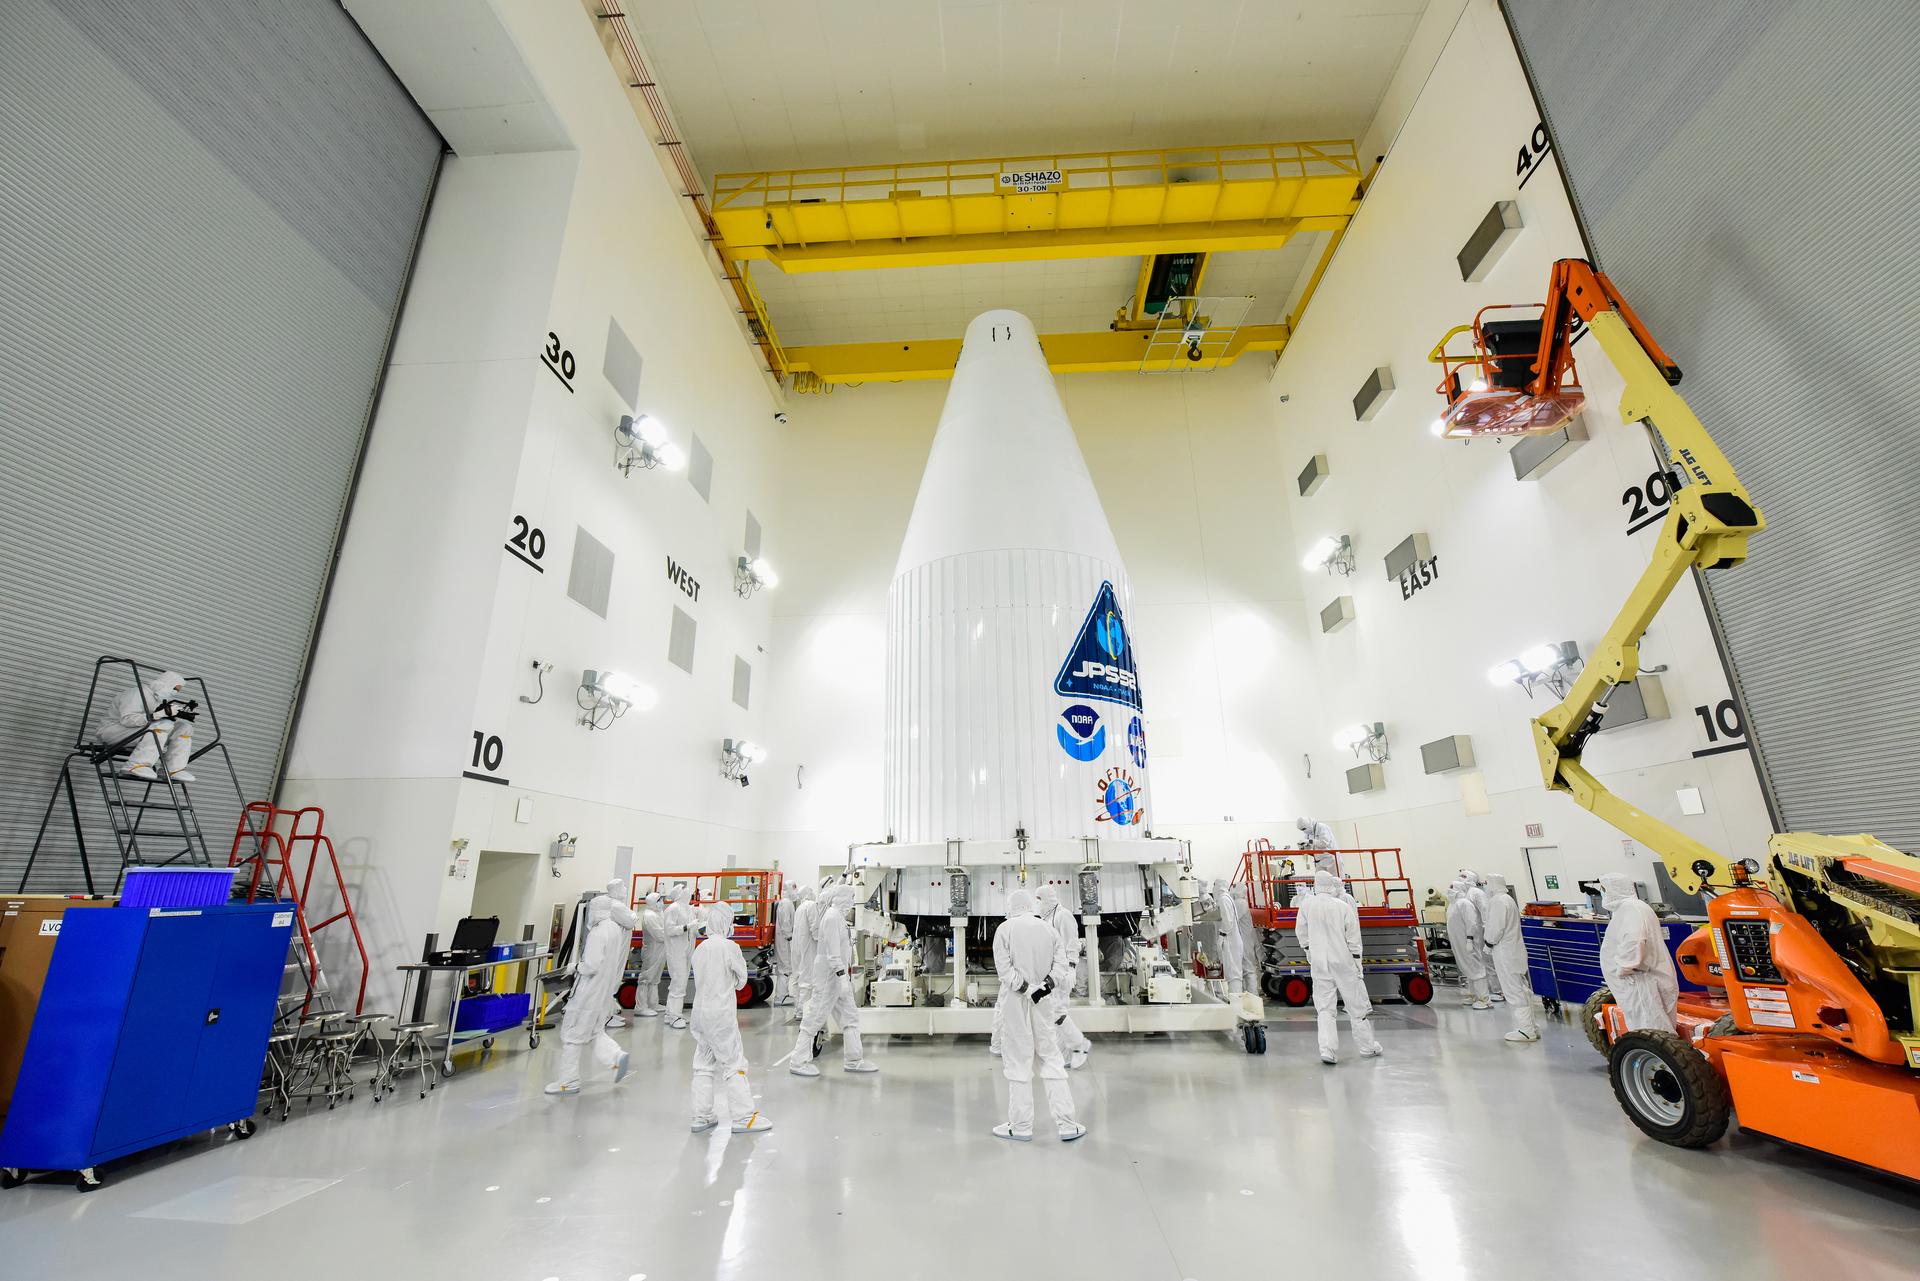 Technicians check the ULA Atlas V payload fairing containing NOAA's JPSS-2 satellite inside the Astrotech Space Operations Facility at Vandenberg Space Force Base.